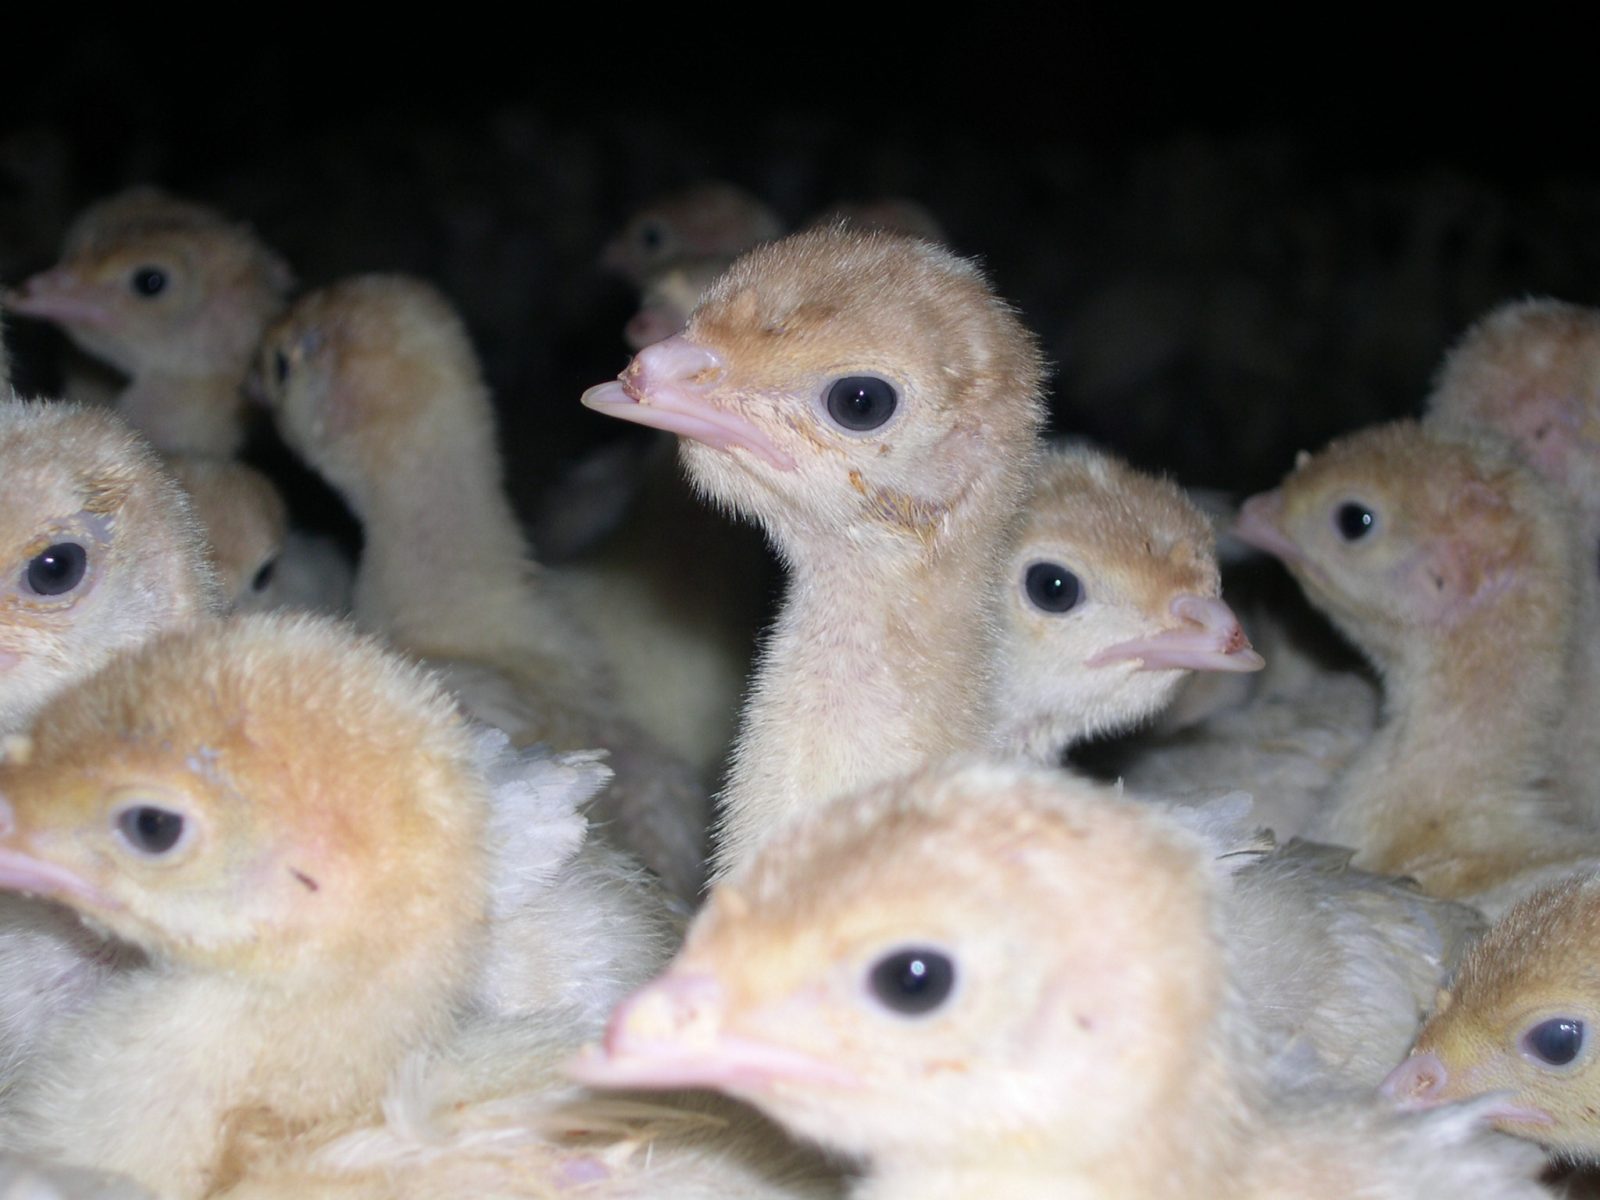 Debeaked turkey poults at a factory farm.